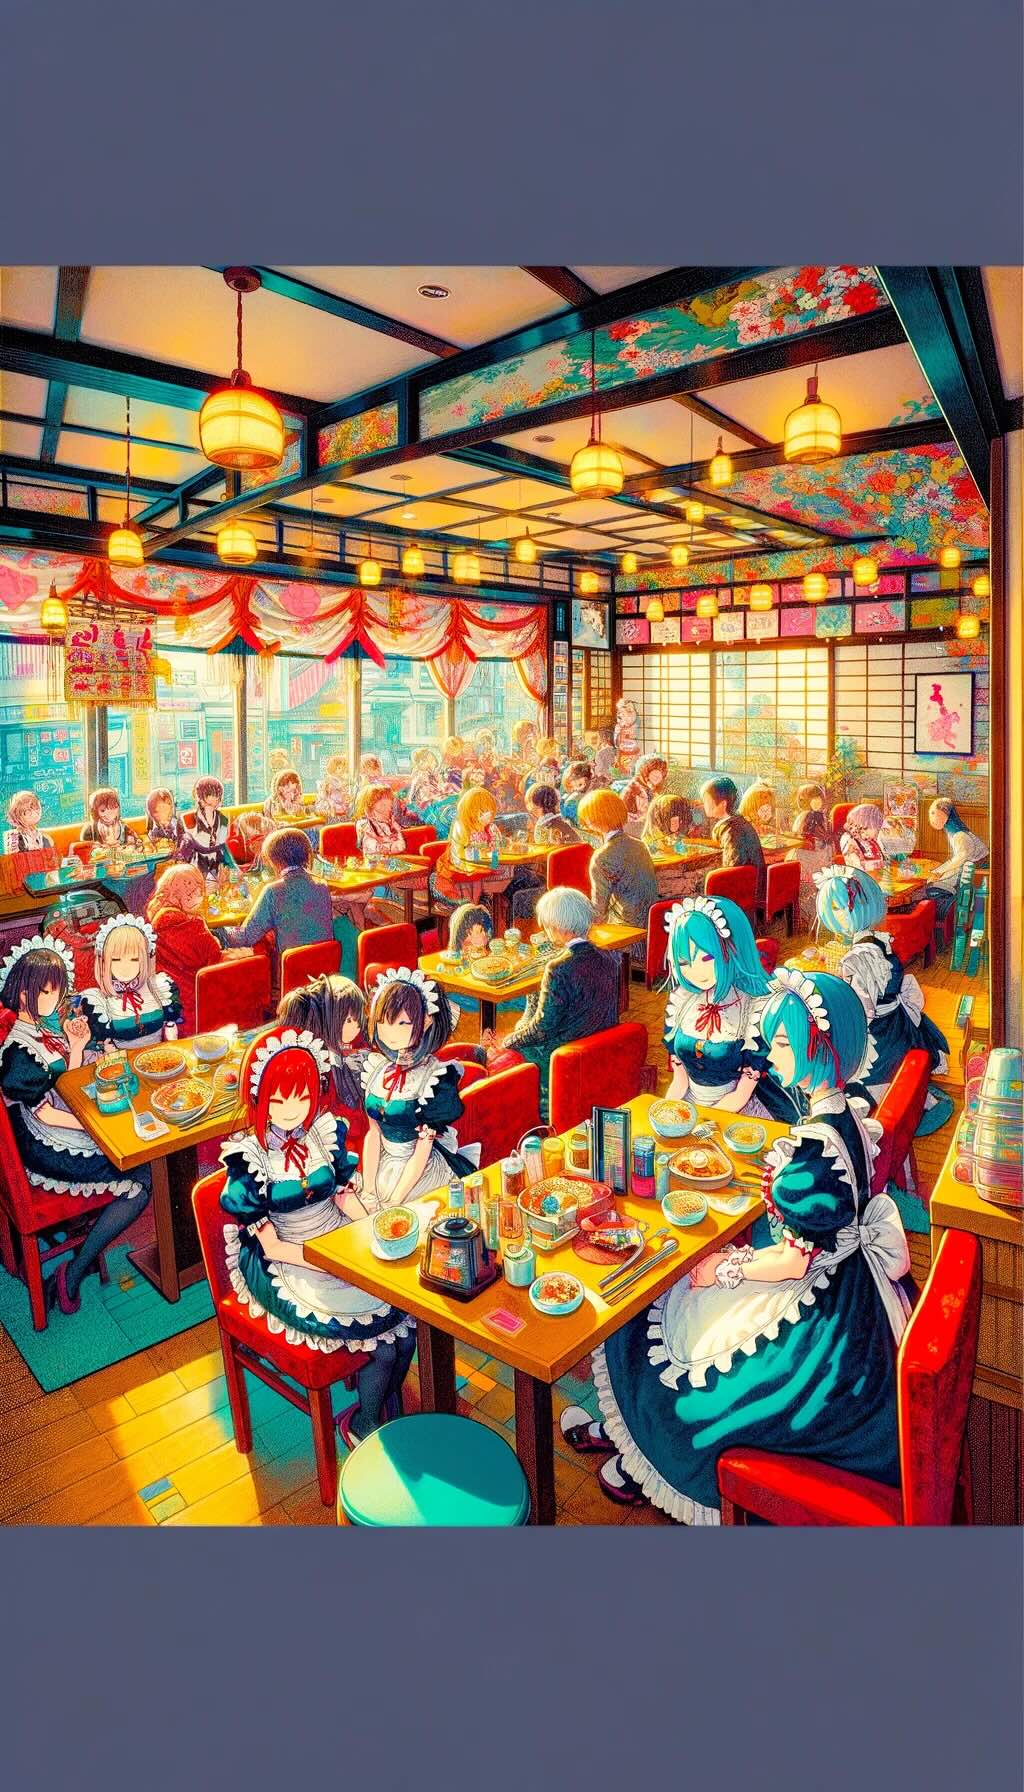 Portrays the colorful and immersive world of character or anime-themed cafes in Japan, capturing the whimsical and affectionate atmosphere of these unique establishments